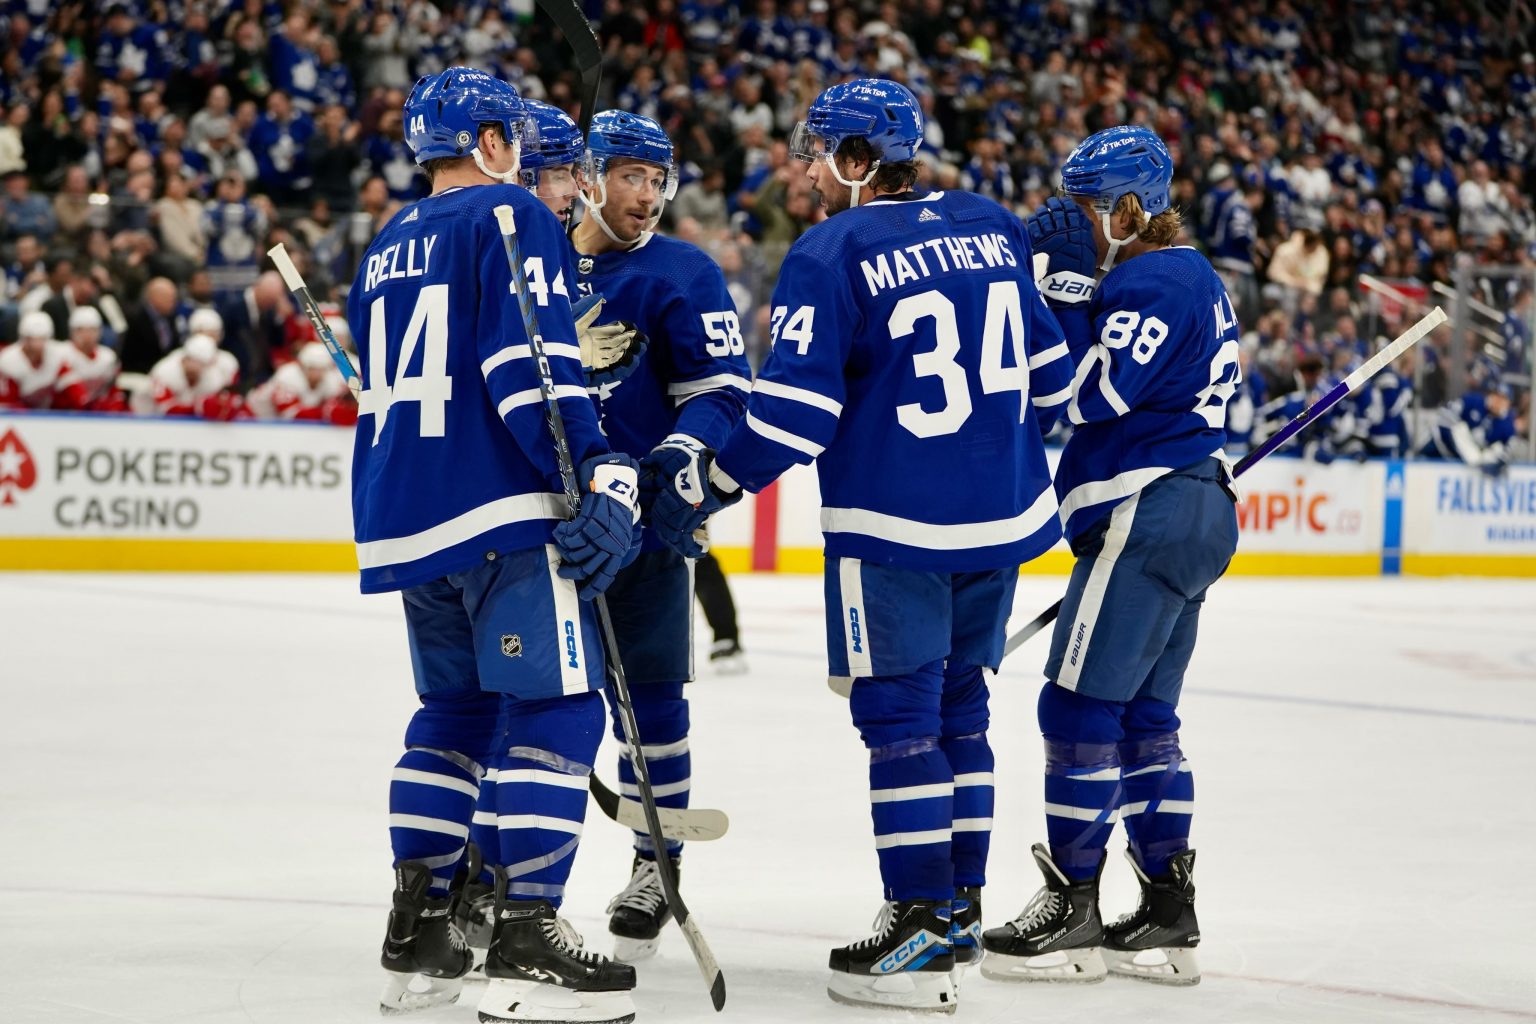 Nhl Predictions Oct 12 Including Toronto Maple Leafs Vs Montreal Canadiens